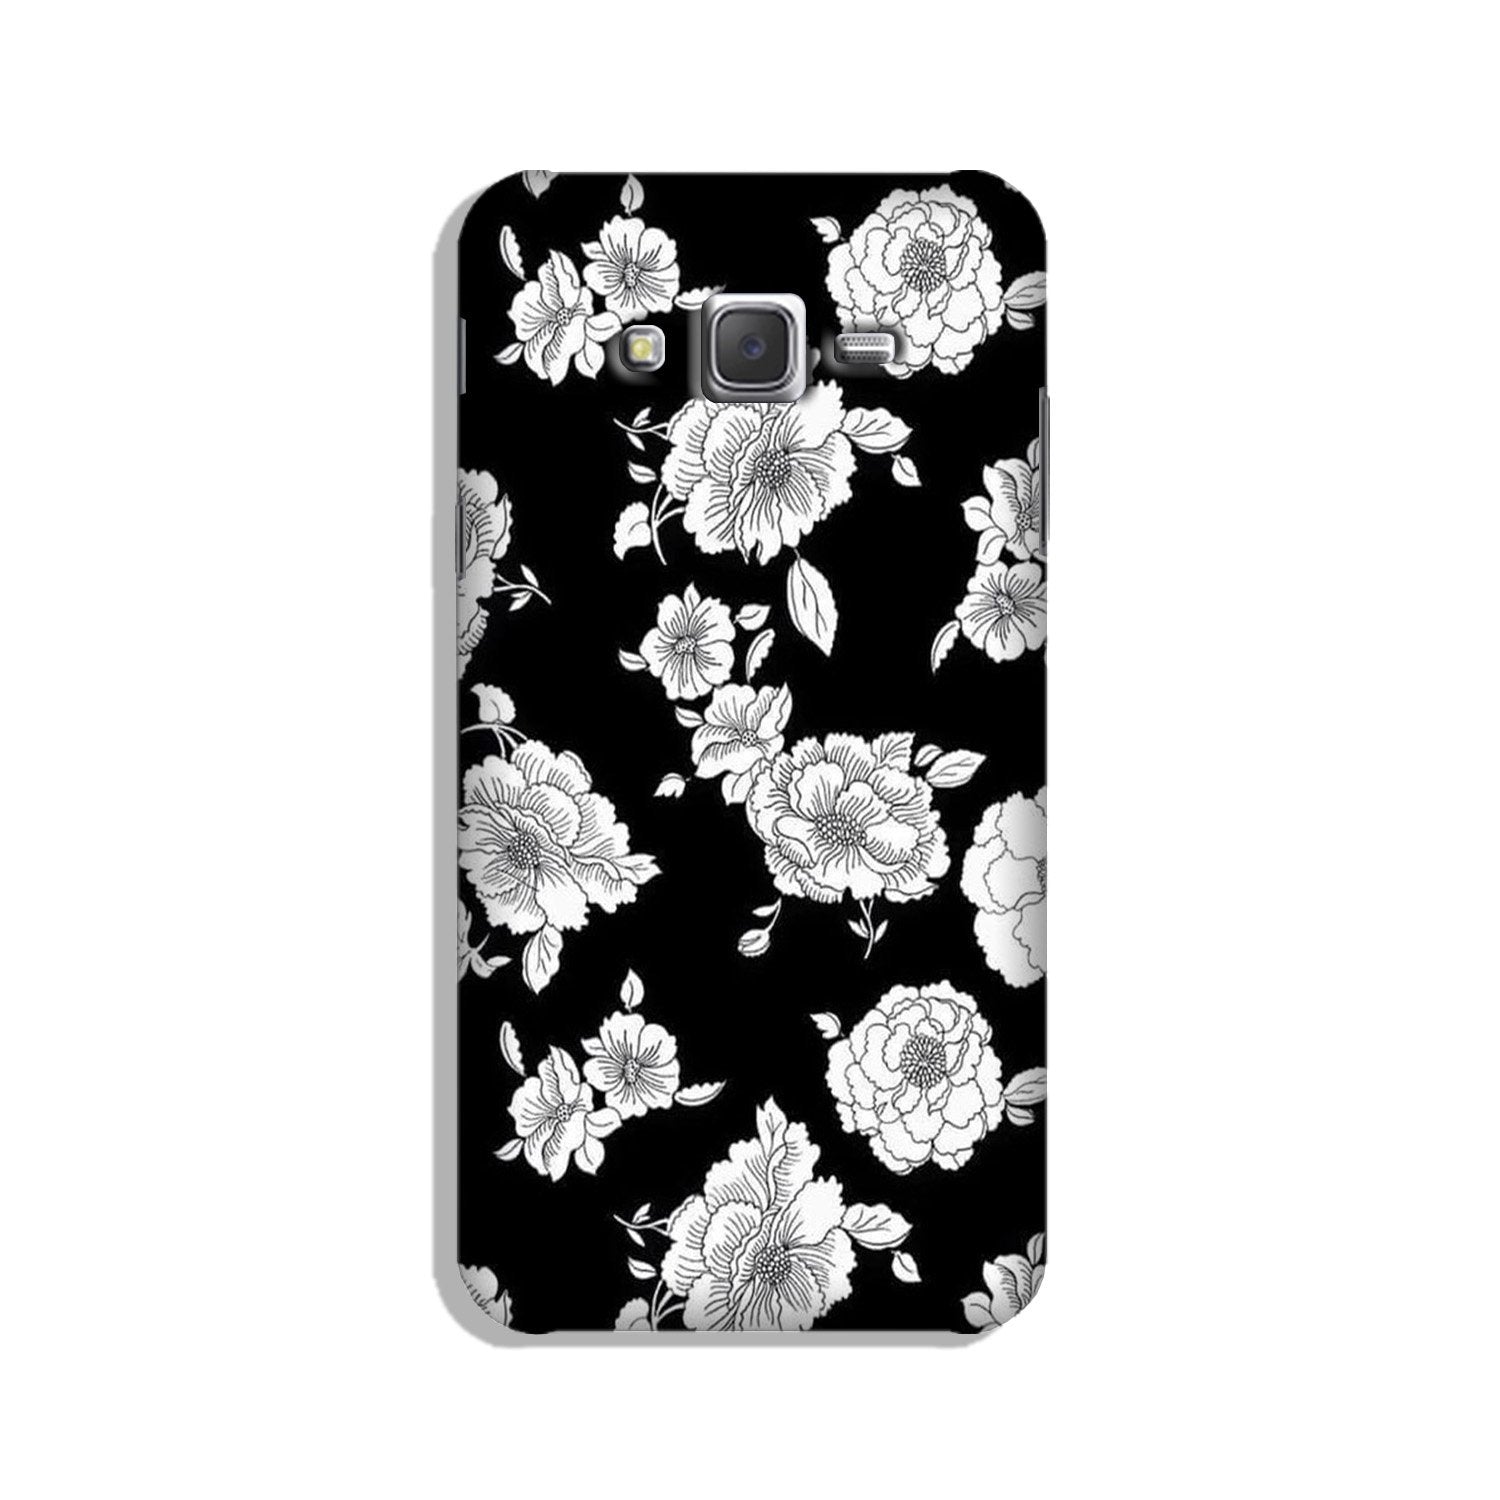 White flowers Black Background Case for Galaxy J3 (2015)